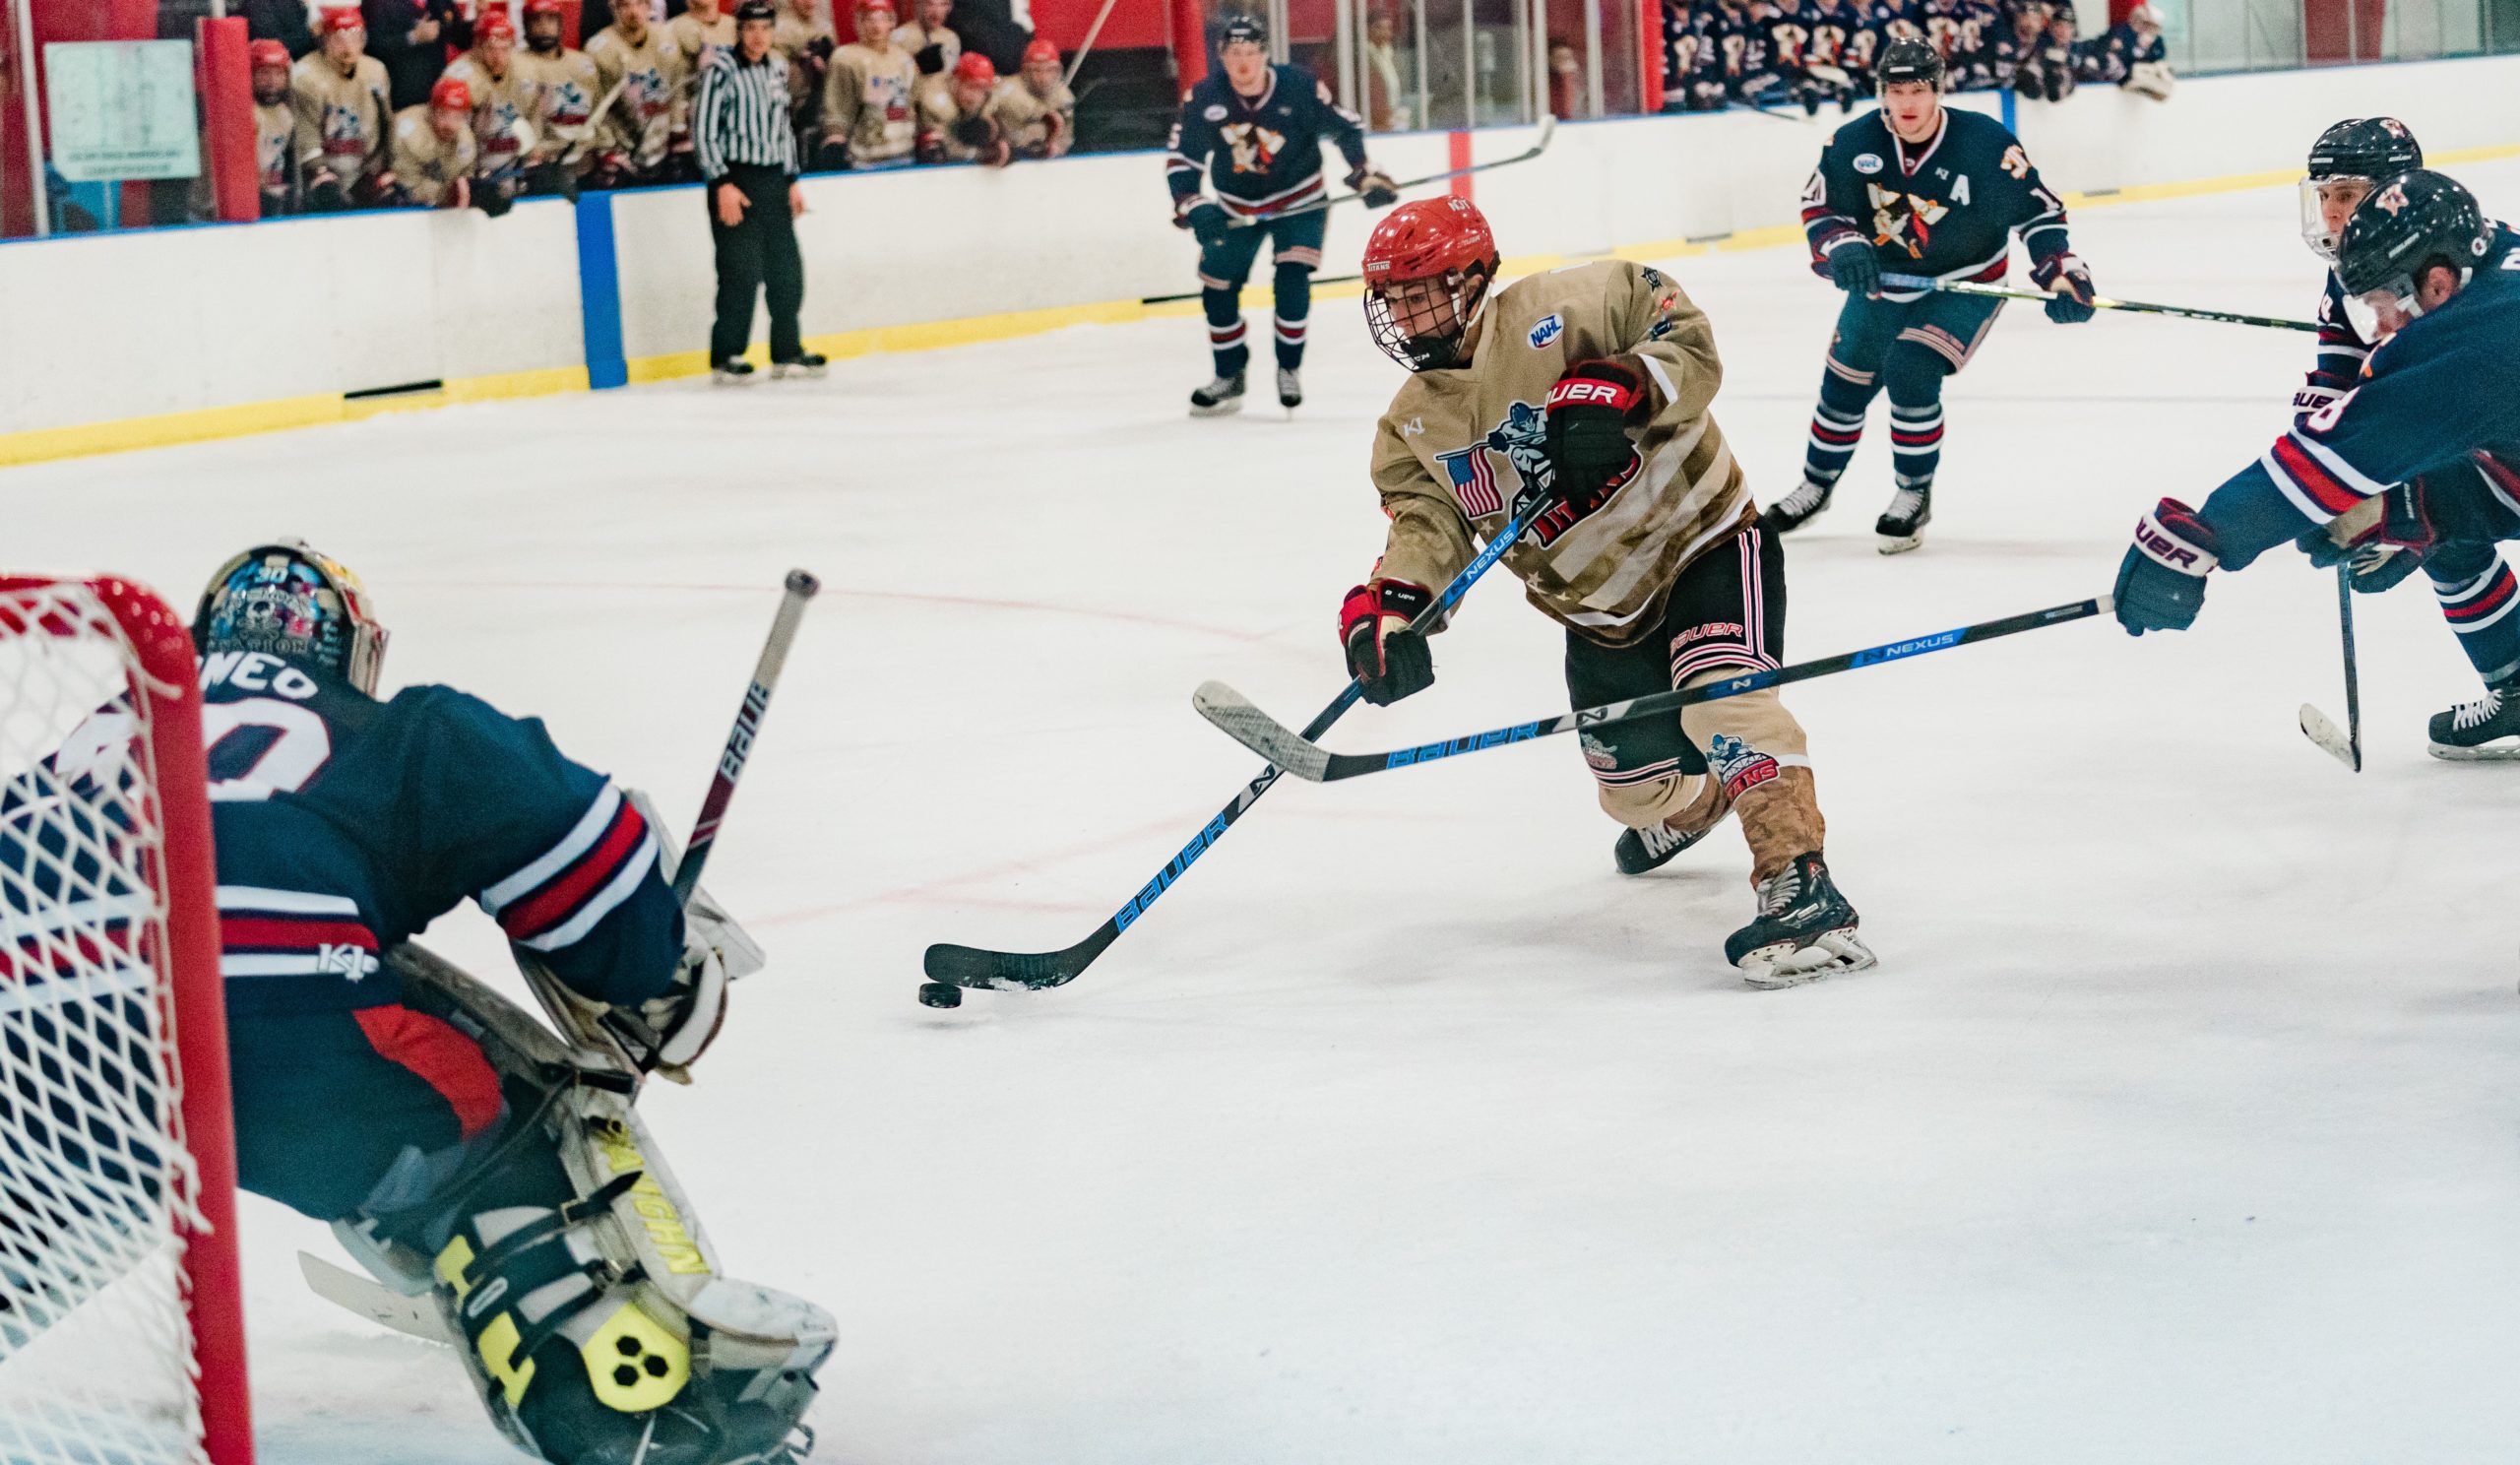 Balanced attack leads Titans to 5 – 3 win over Tomahawks in playoff type atmosphere